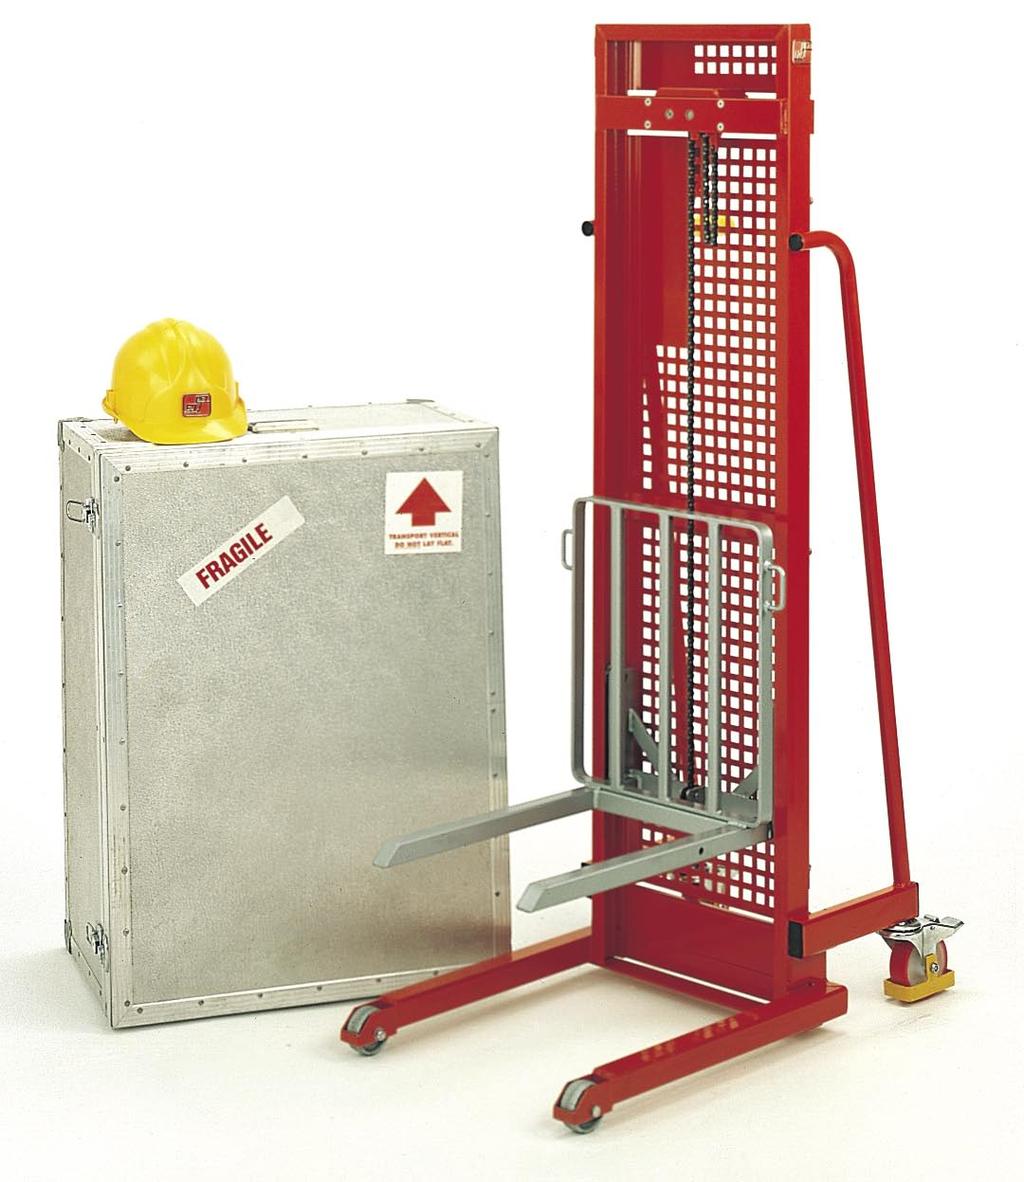 General Purpose Lifters 131 All Ezi-Lift products are guarded for operator protection ELI 125 90 + RPP 6 Gearbox Manual